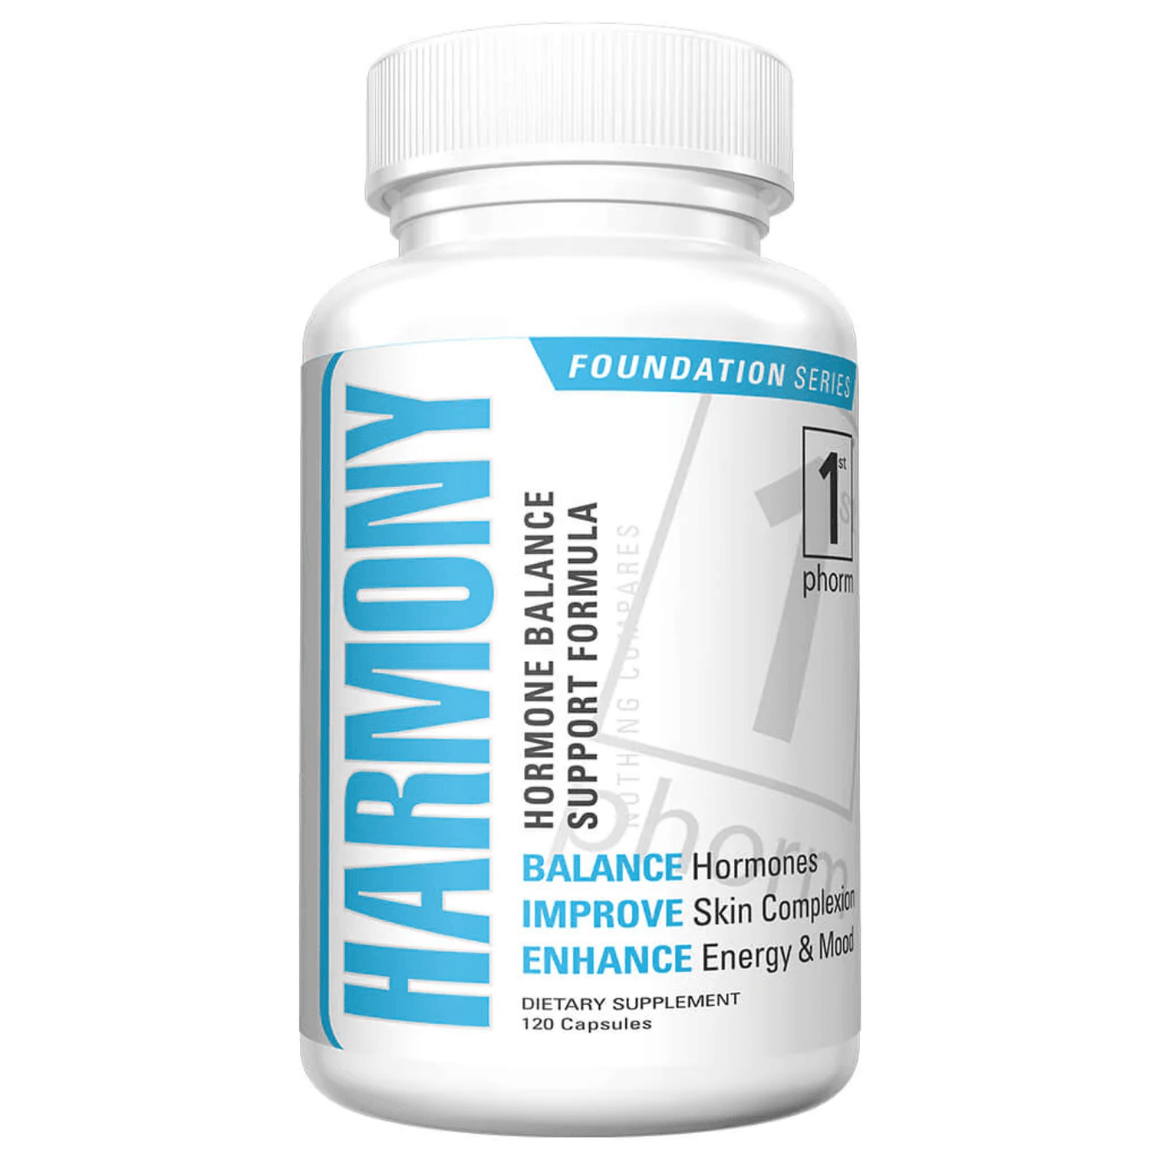 CALL FOR BEST PRICING! 1st Phorm - Harmony Hormone Balance Call Us To Order! 817-301-6816 DESCRIPTION At 1st Phorm, we understand the challenges females face when it comes to hormone fluctuations throughout a woman’s monthly and lifetime cycles. That’s wh